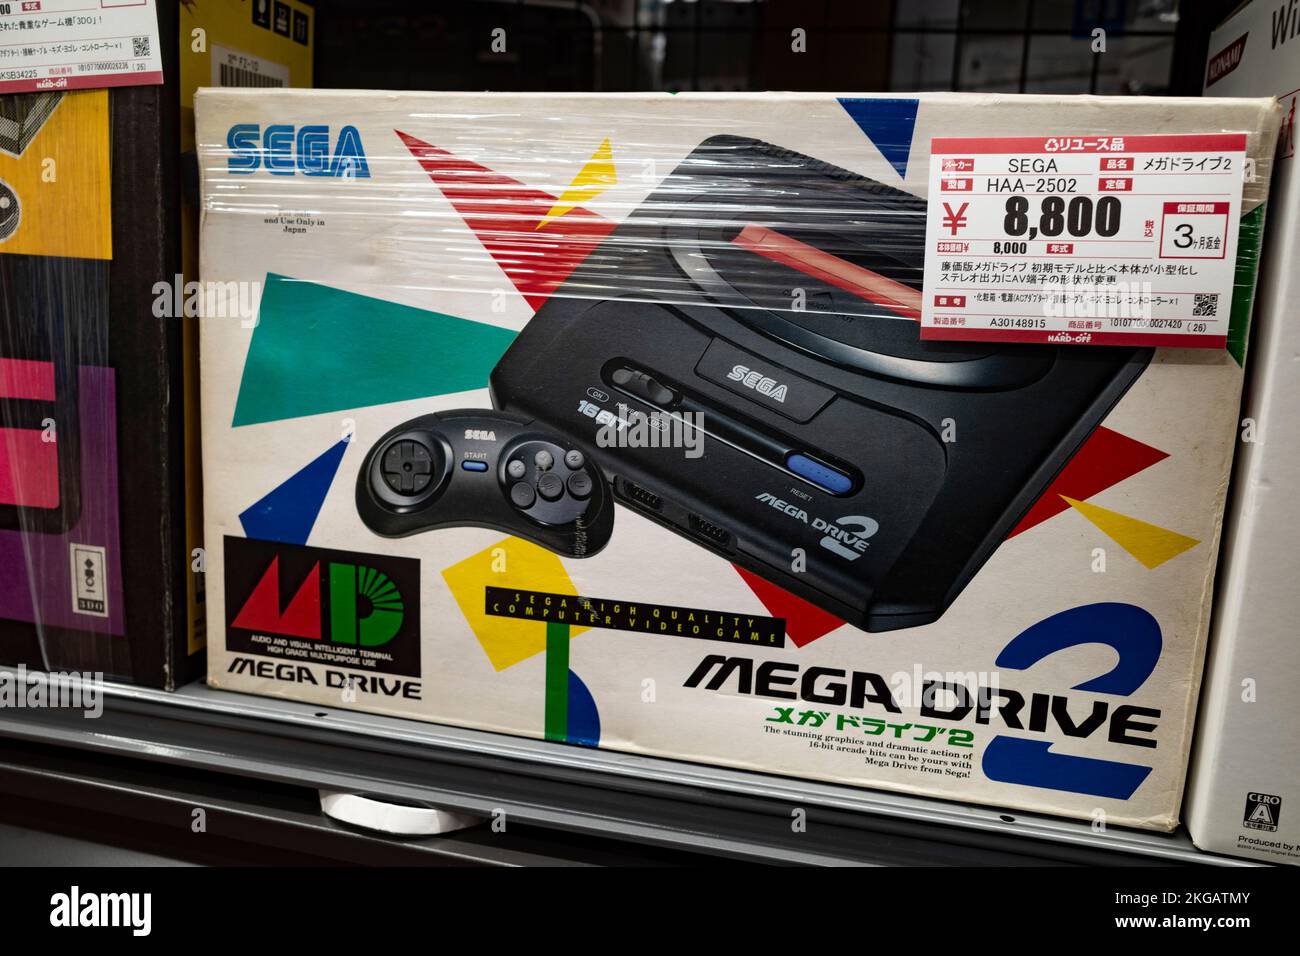 Tokyo, Japan. 16th Nov, 2022. A used Sega Mega Drive 2 (Sega Genesis) video game console from the 1990s for sale in Japan. Most vintage and refurbished electronics sold worldwide come from Japanese shops due to the high quality of maintenance and care amid a booming popularity in old electronics and analog 35mm film.Japan has recently reopened to tourism after over two years of travel bans due to the COVID-19 pandemic. The Yen (JPY) has greatly depreciated against the USD US Dollar, creating economic turmoil for international trade and the Japanese economy. (Credit Image: © Taidgh Barron/ Stock Photo